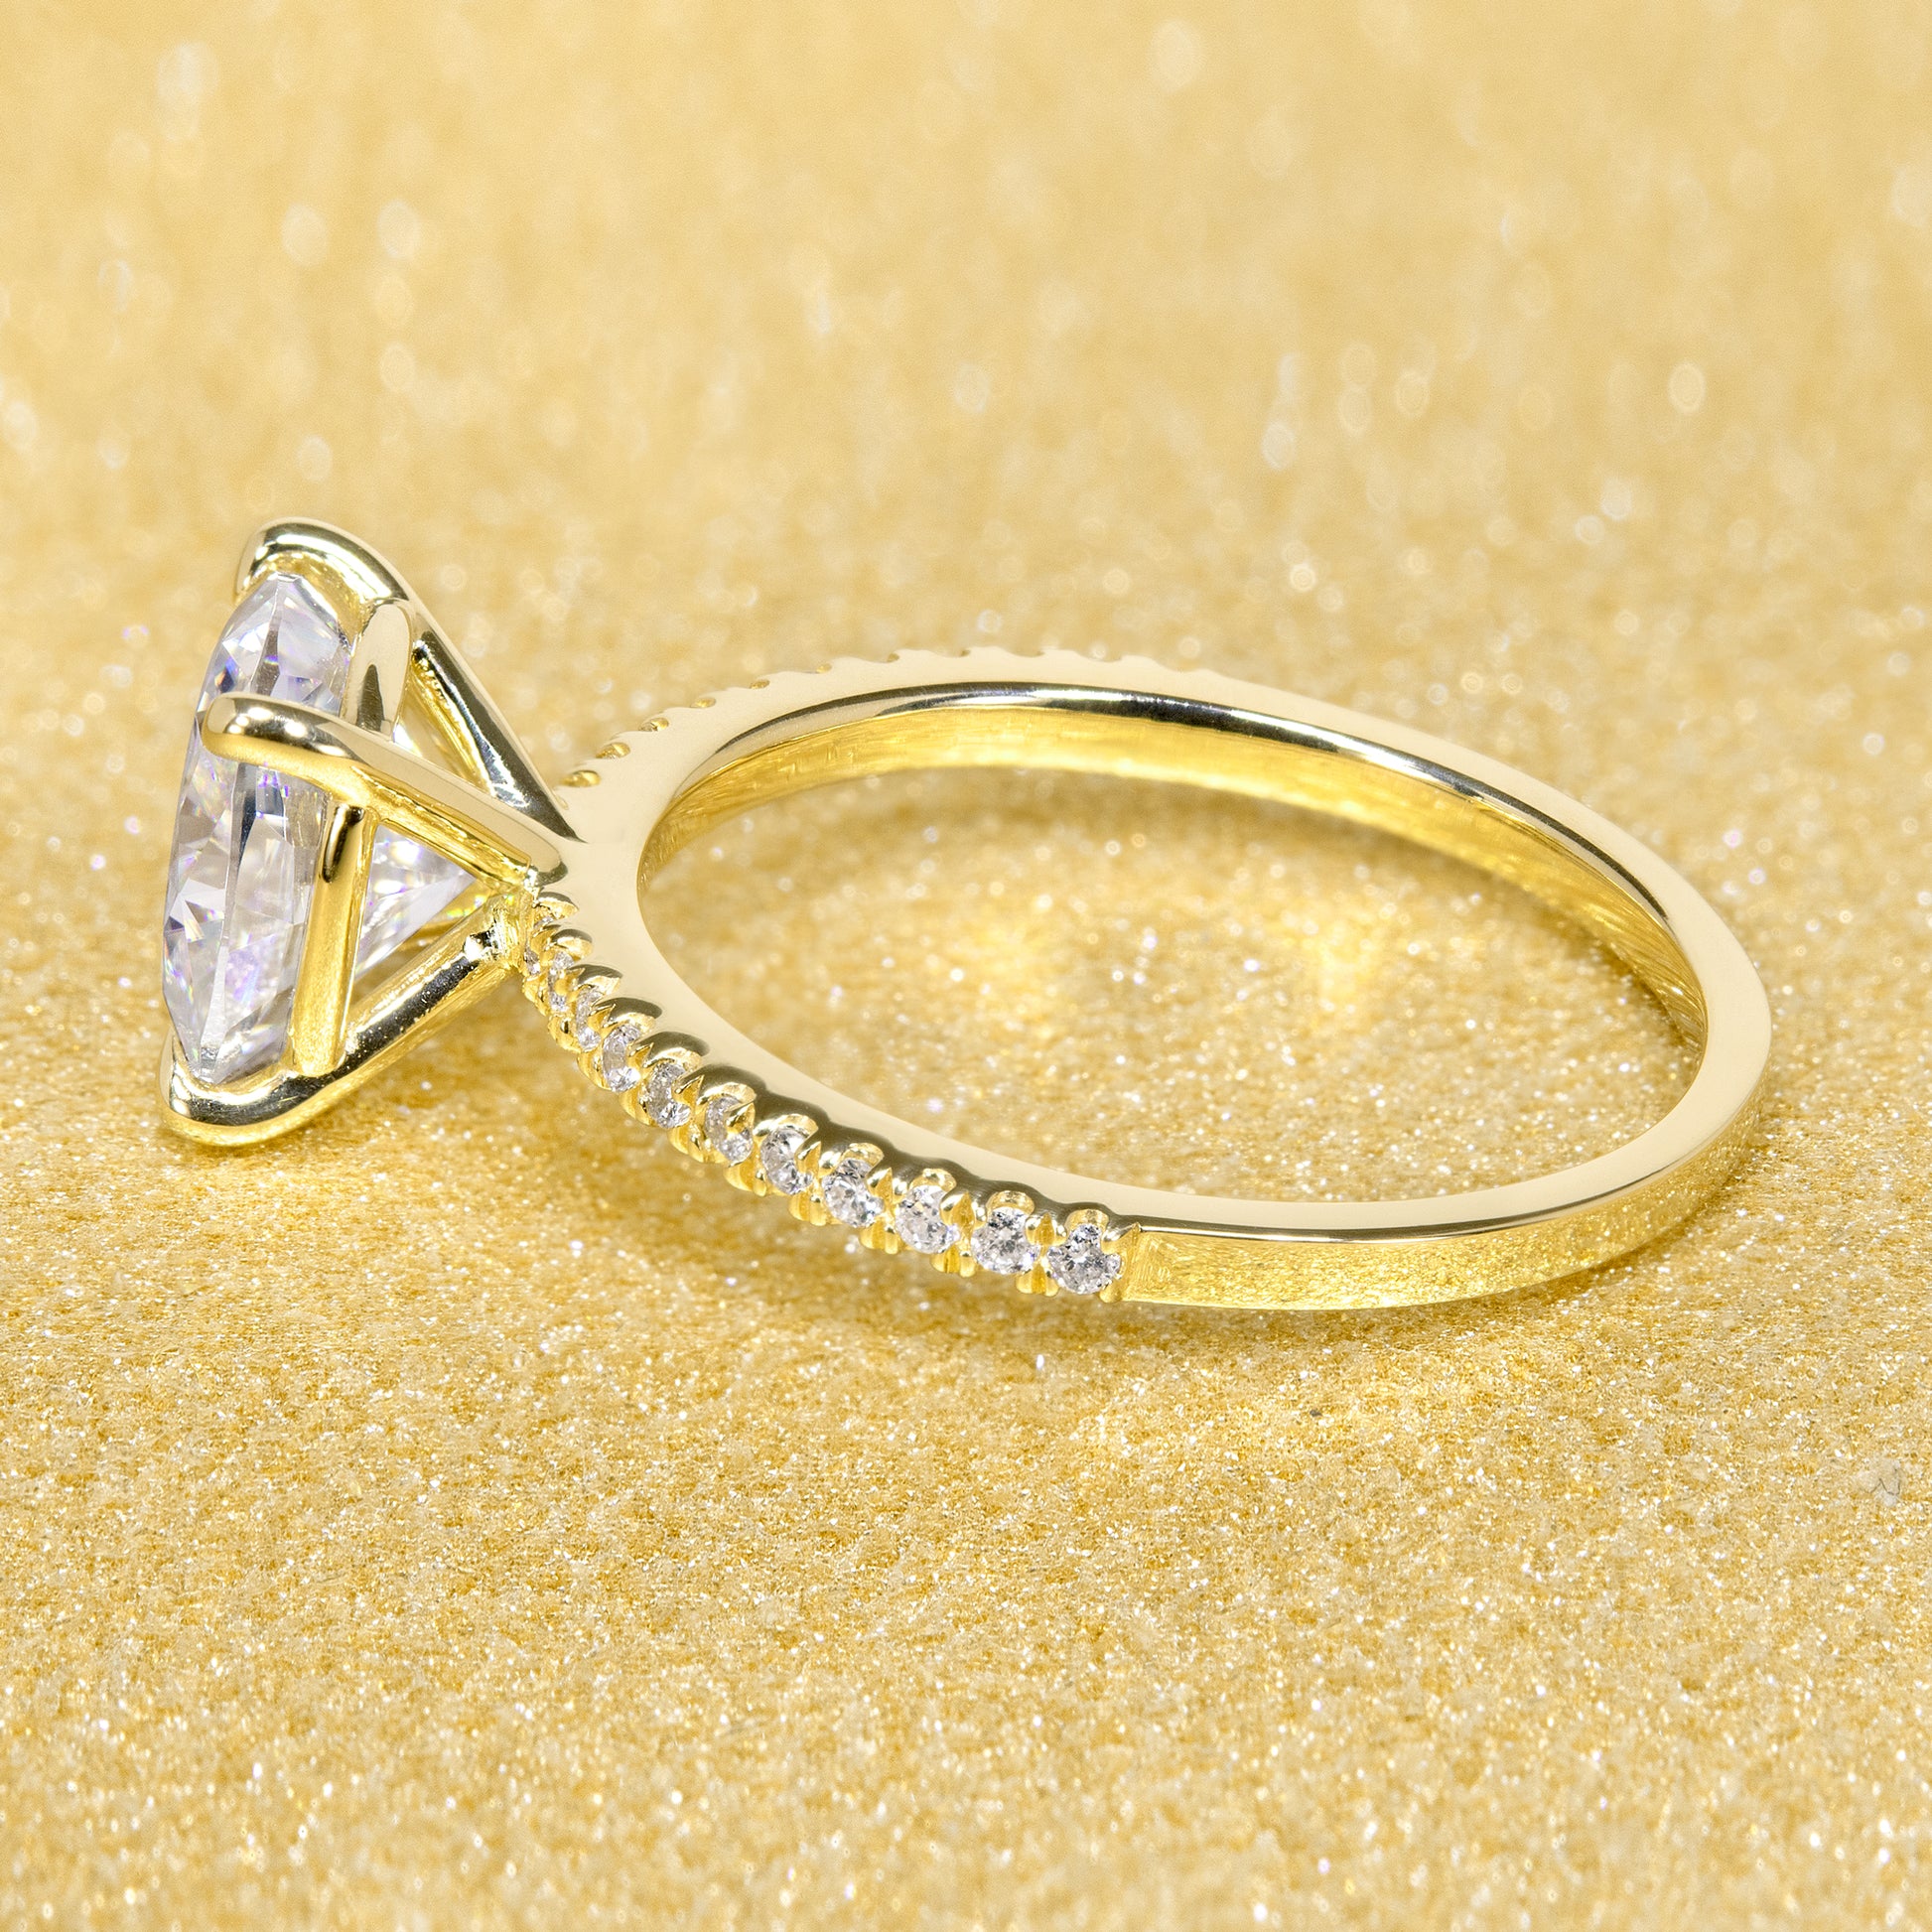 14K Gold Classic 2ct Oval-cut Minimalistic Slim Basket Moissanite and Diamond Engagement Ring | Earthena Jewelry